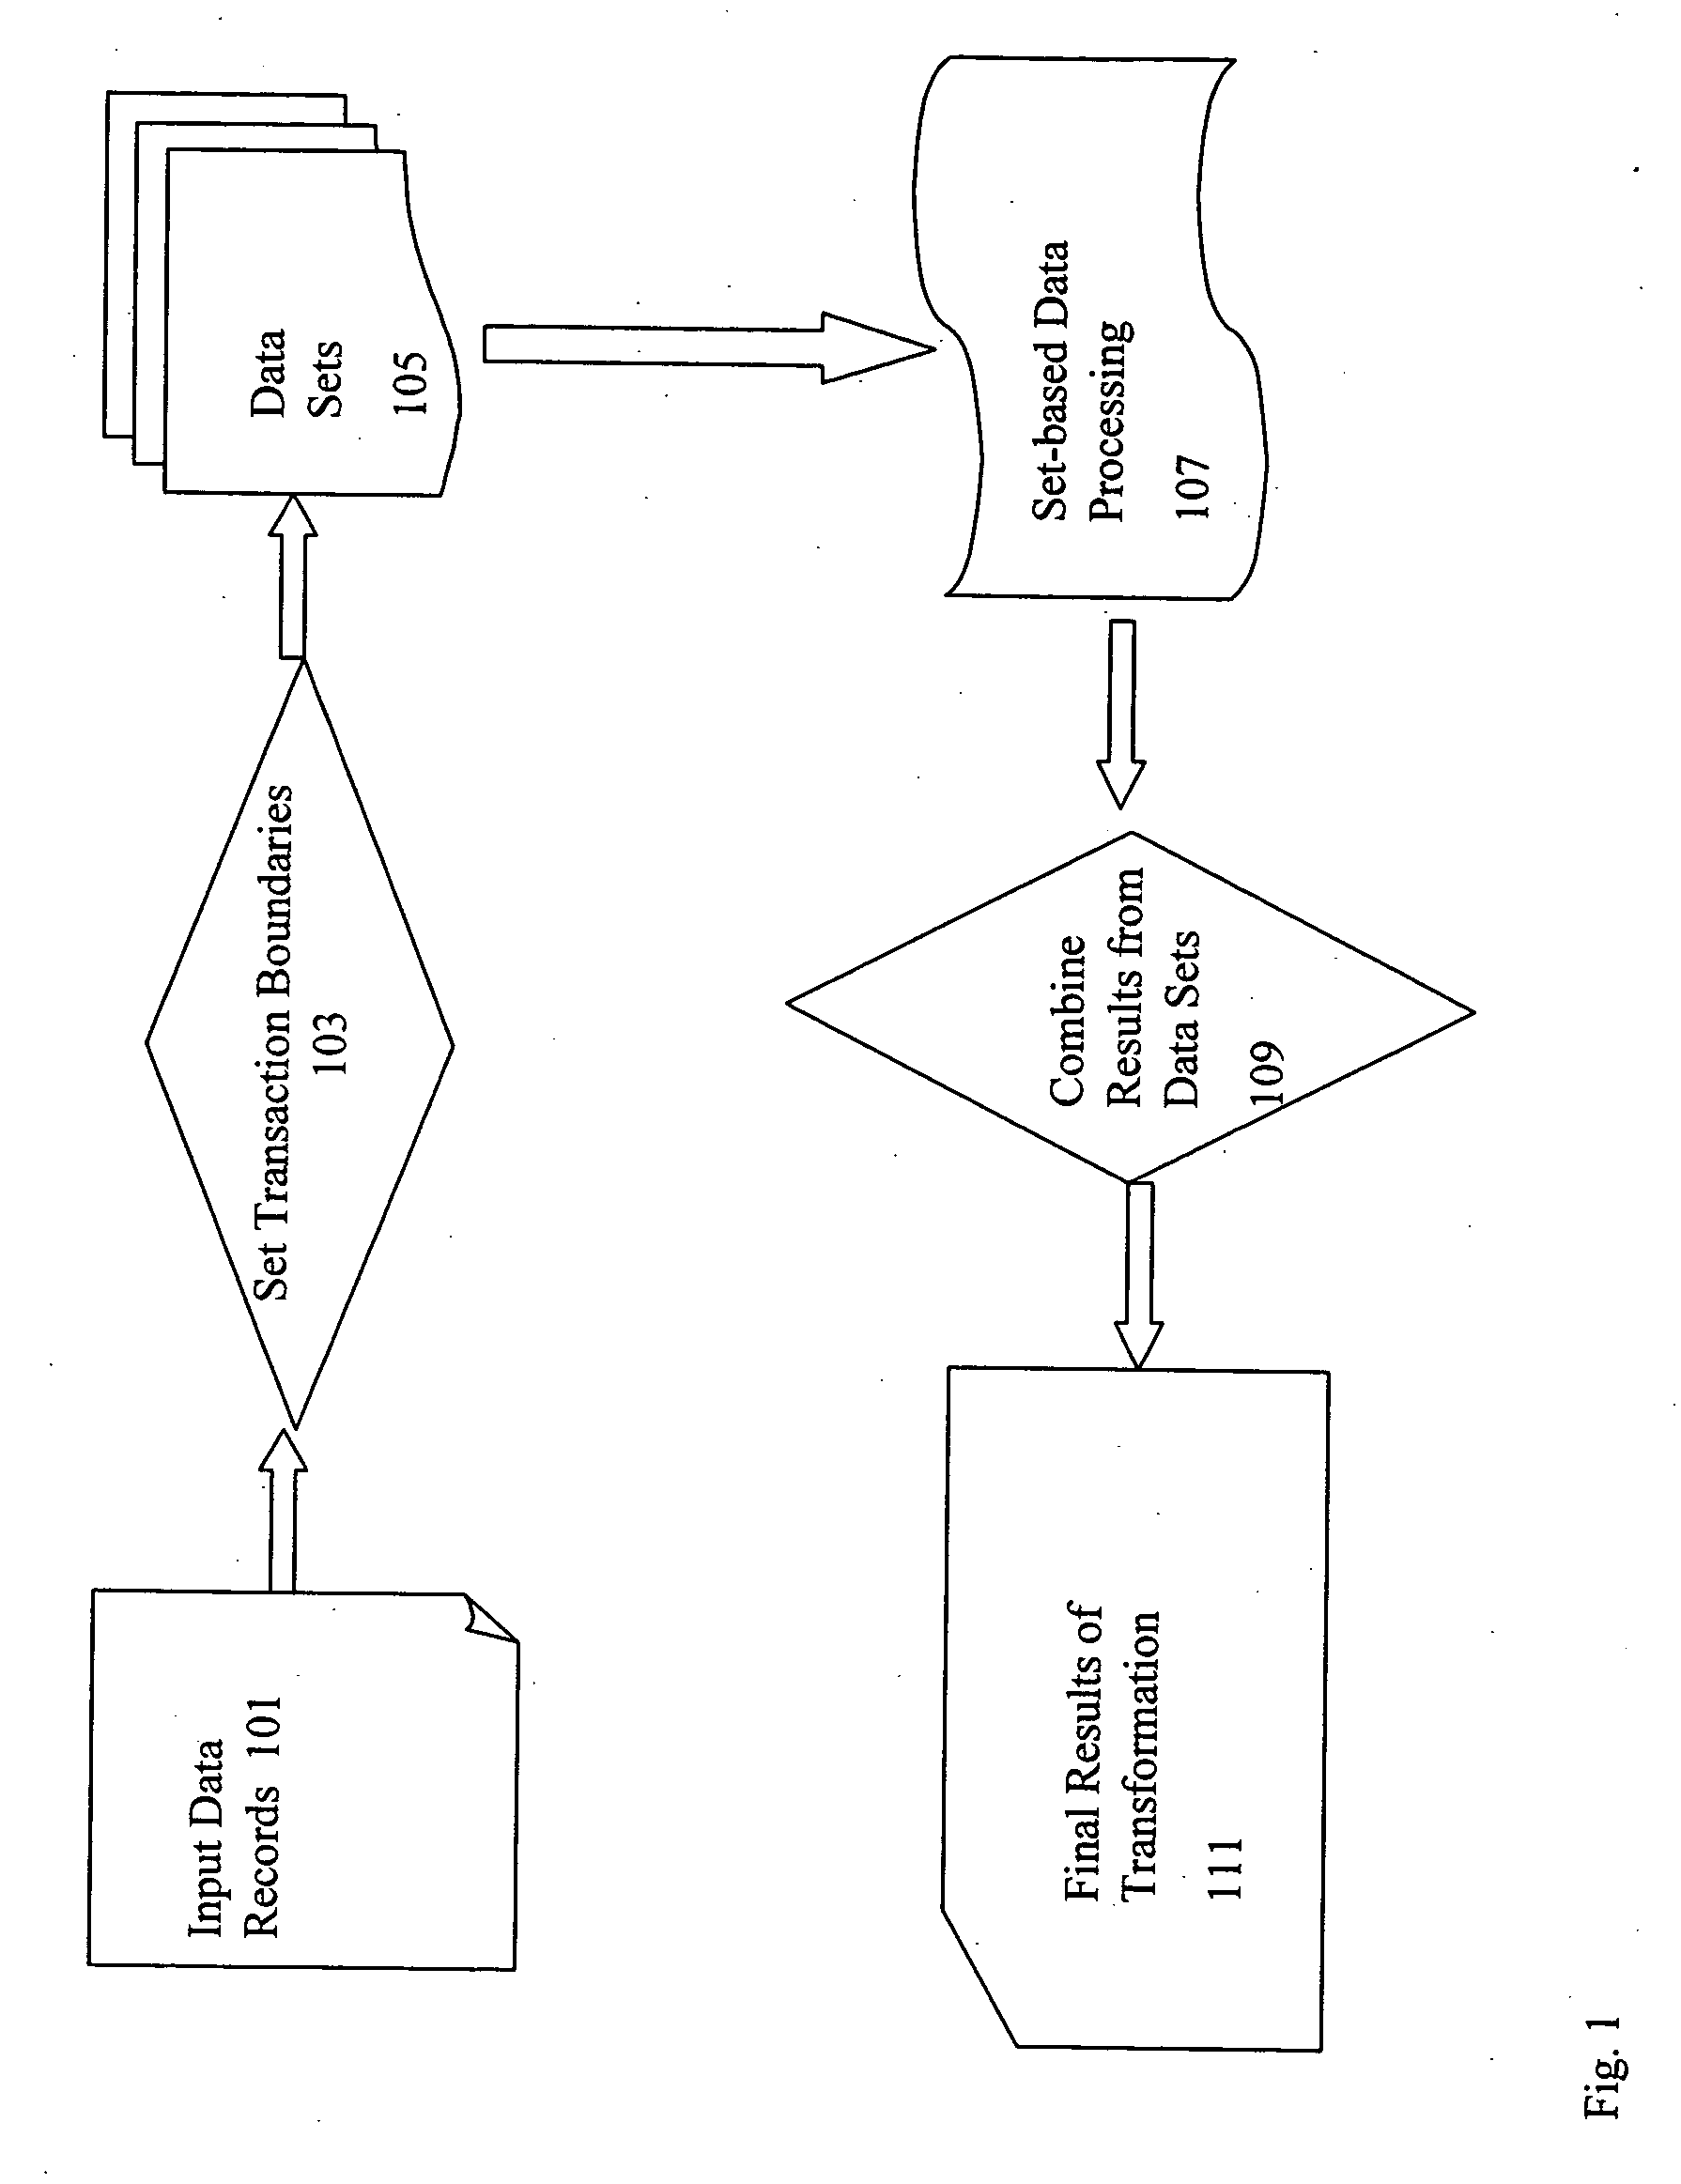 Set-oriented real-time data processing based on transaction boundaries